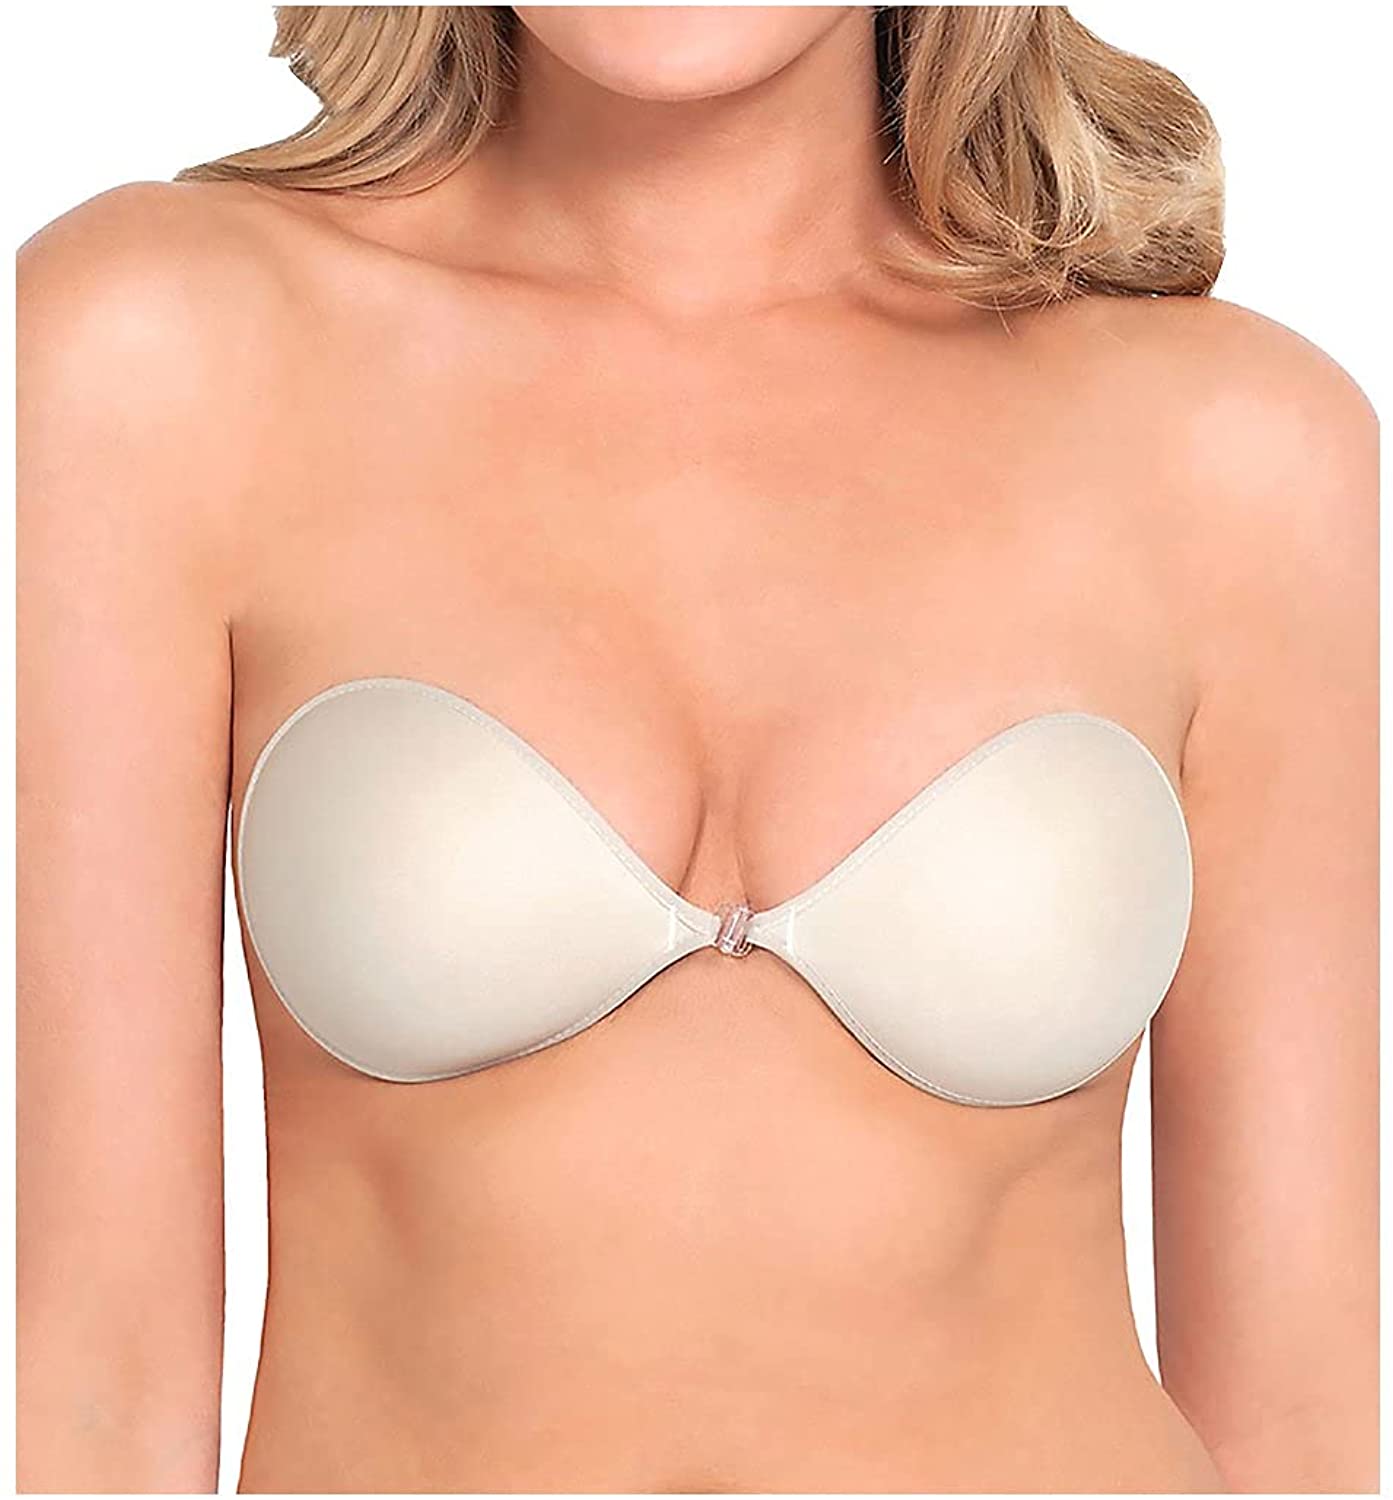 Best Backless Bra for Small Busts Fashion Forms Nubra Ultralite Bra 9 Best Backless and Stick-On Bras for Every Size